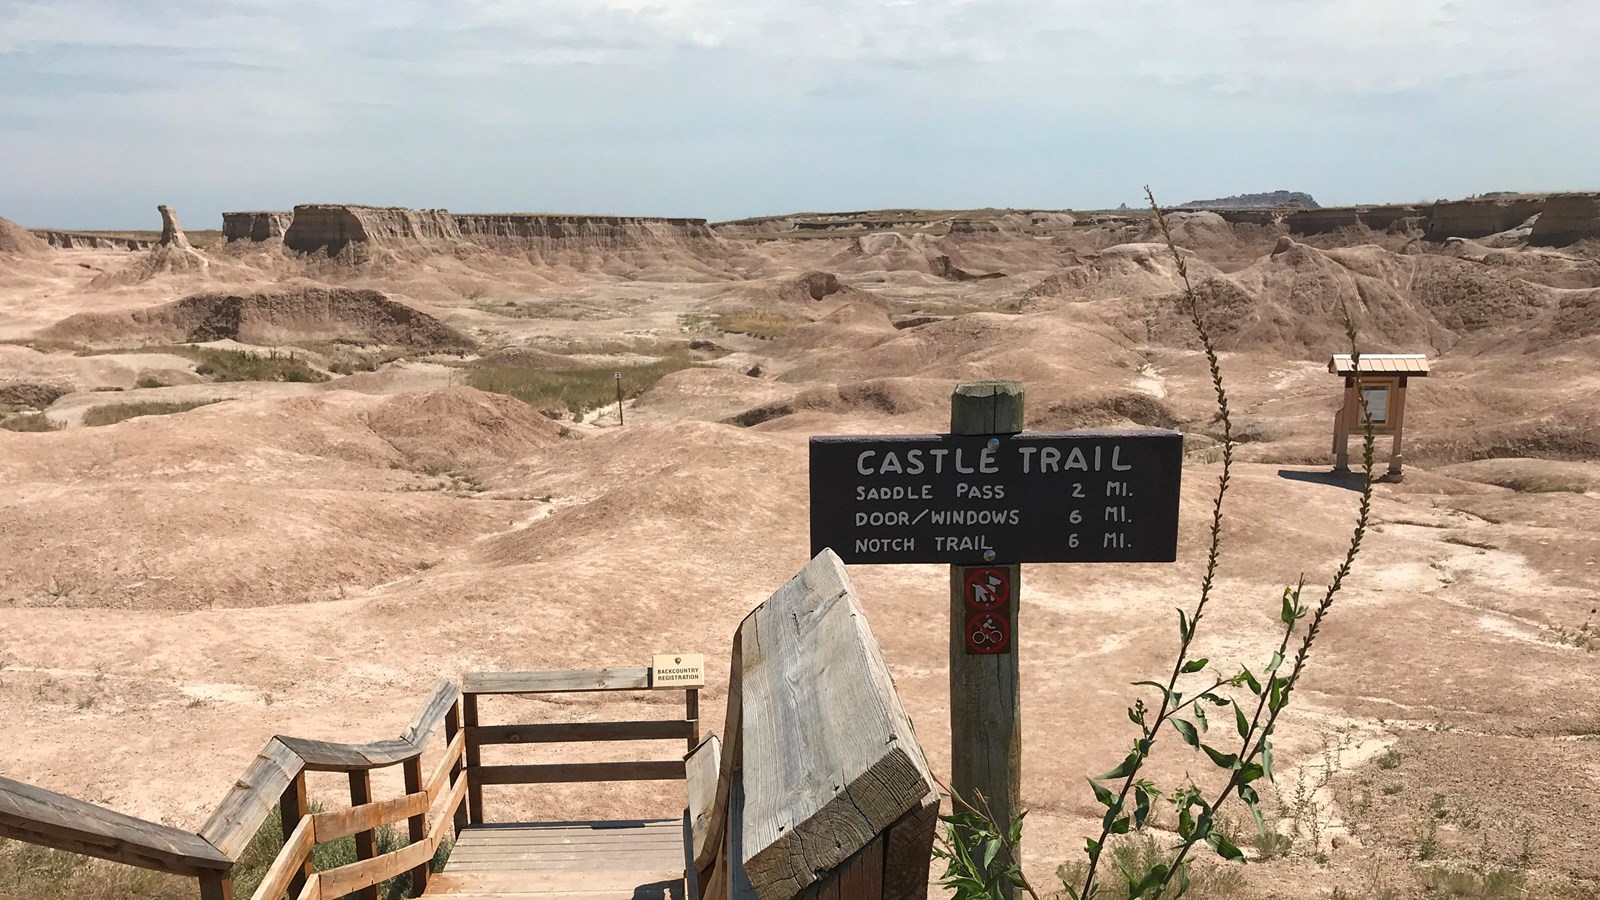 Wooden boardwalk gives way to rolling badlands formations and a meandering trail.